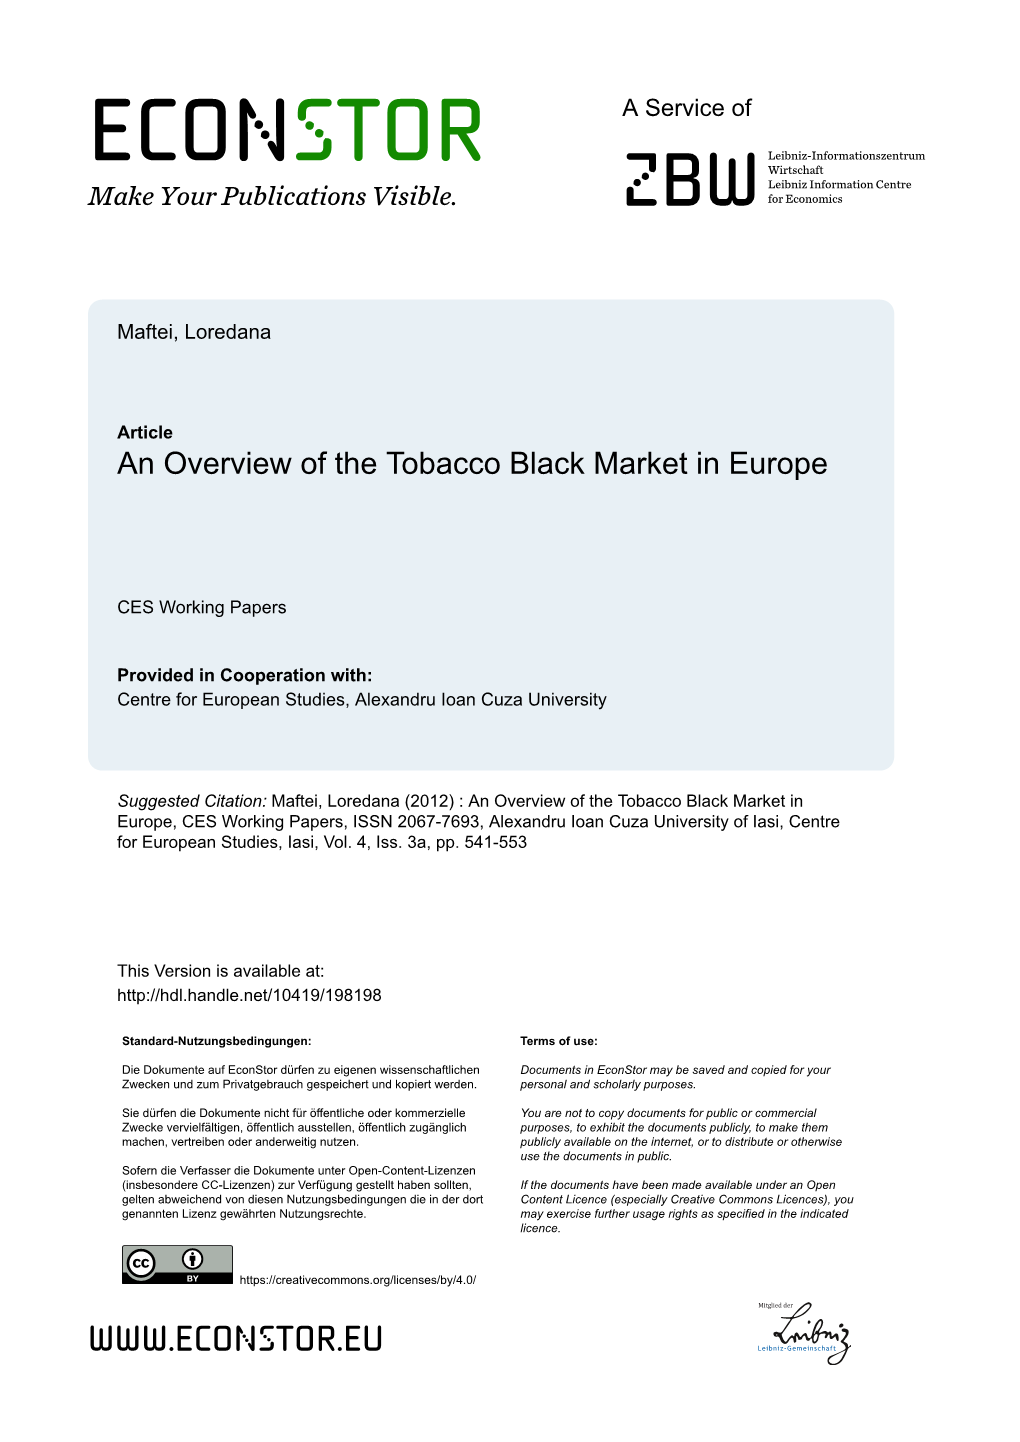 An Overview of the Tobacco Black Market in Europe